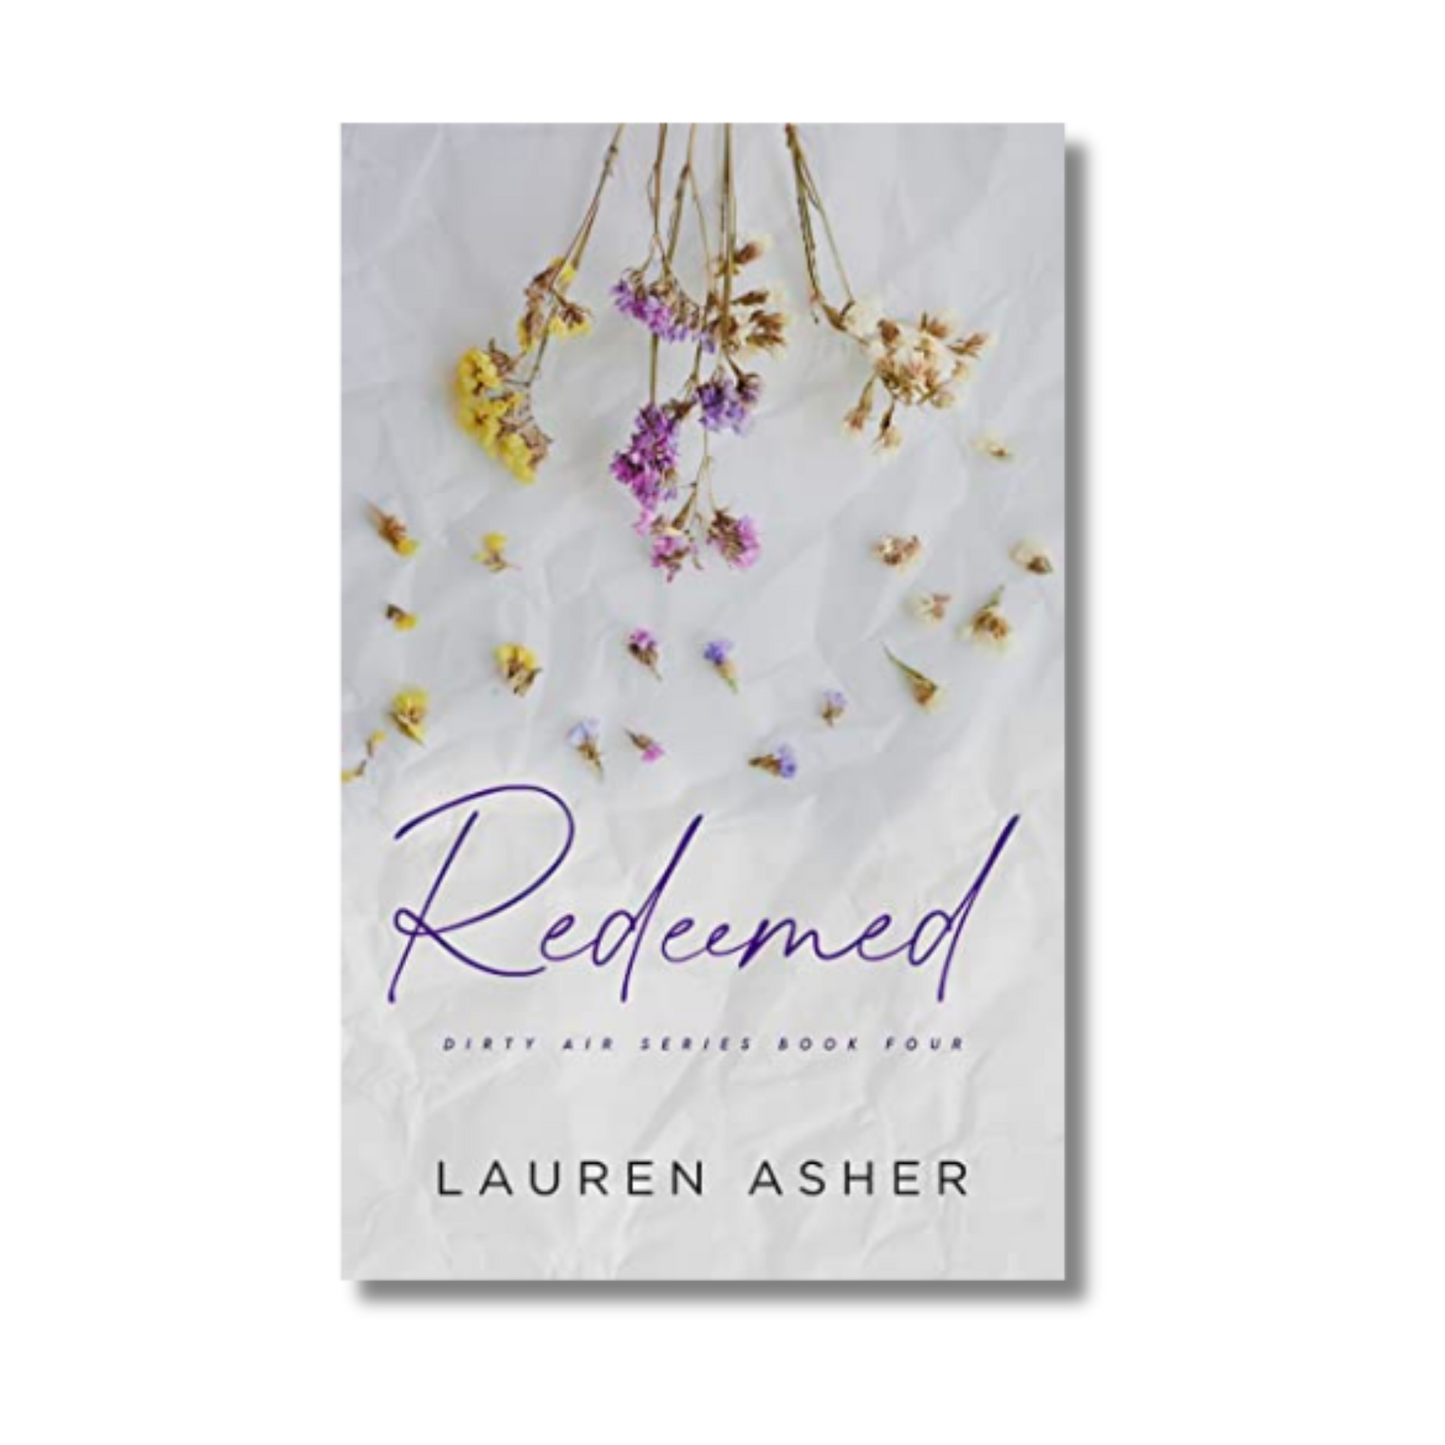 Redeemed (Dirty Air #4) By Lauren Asher (Paperback)